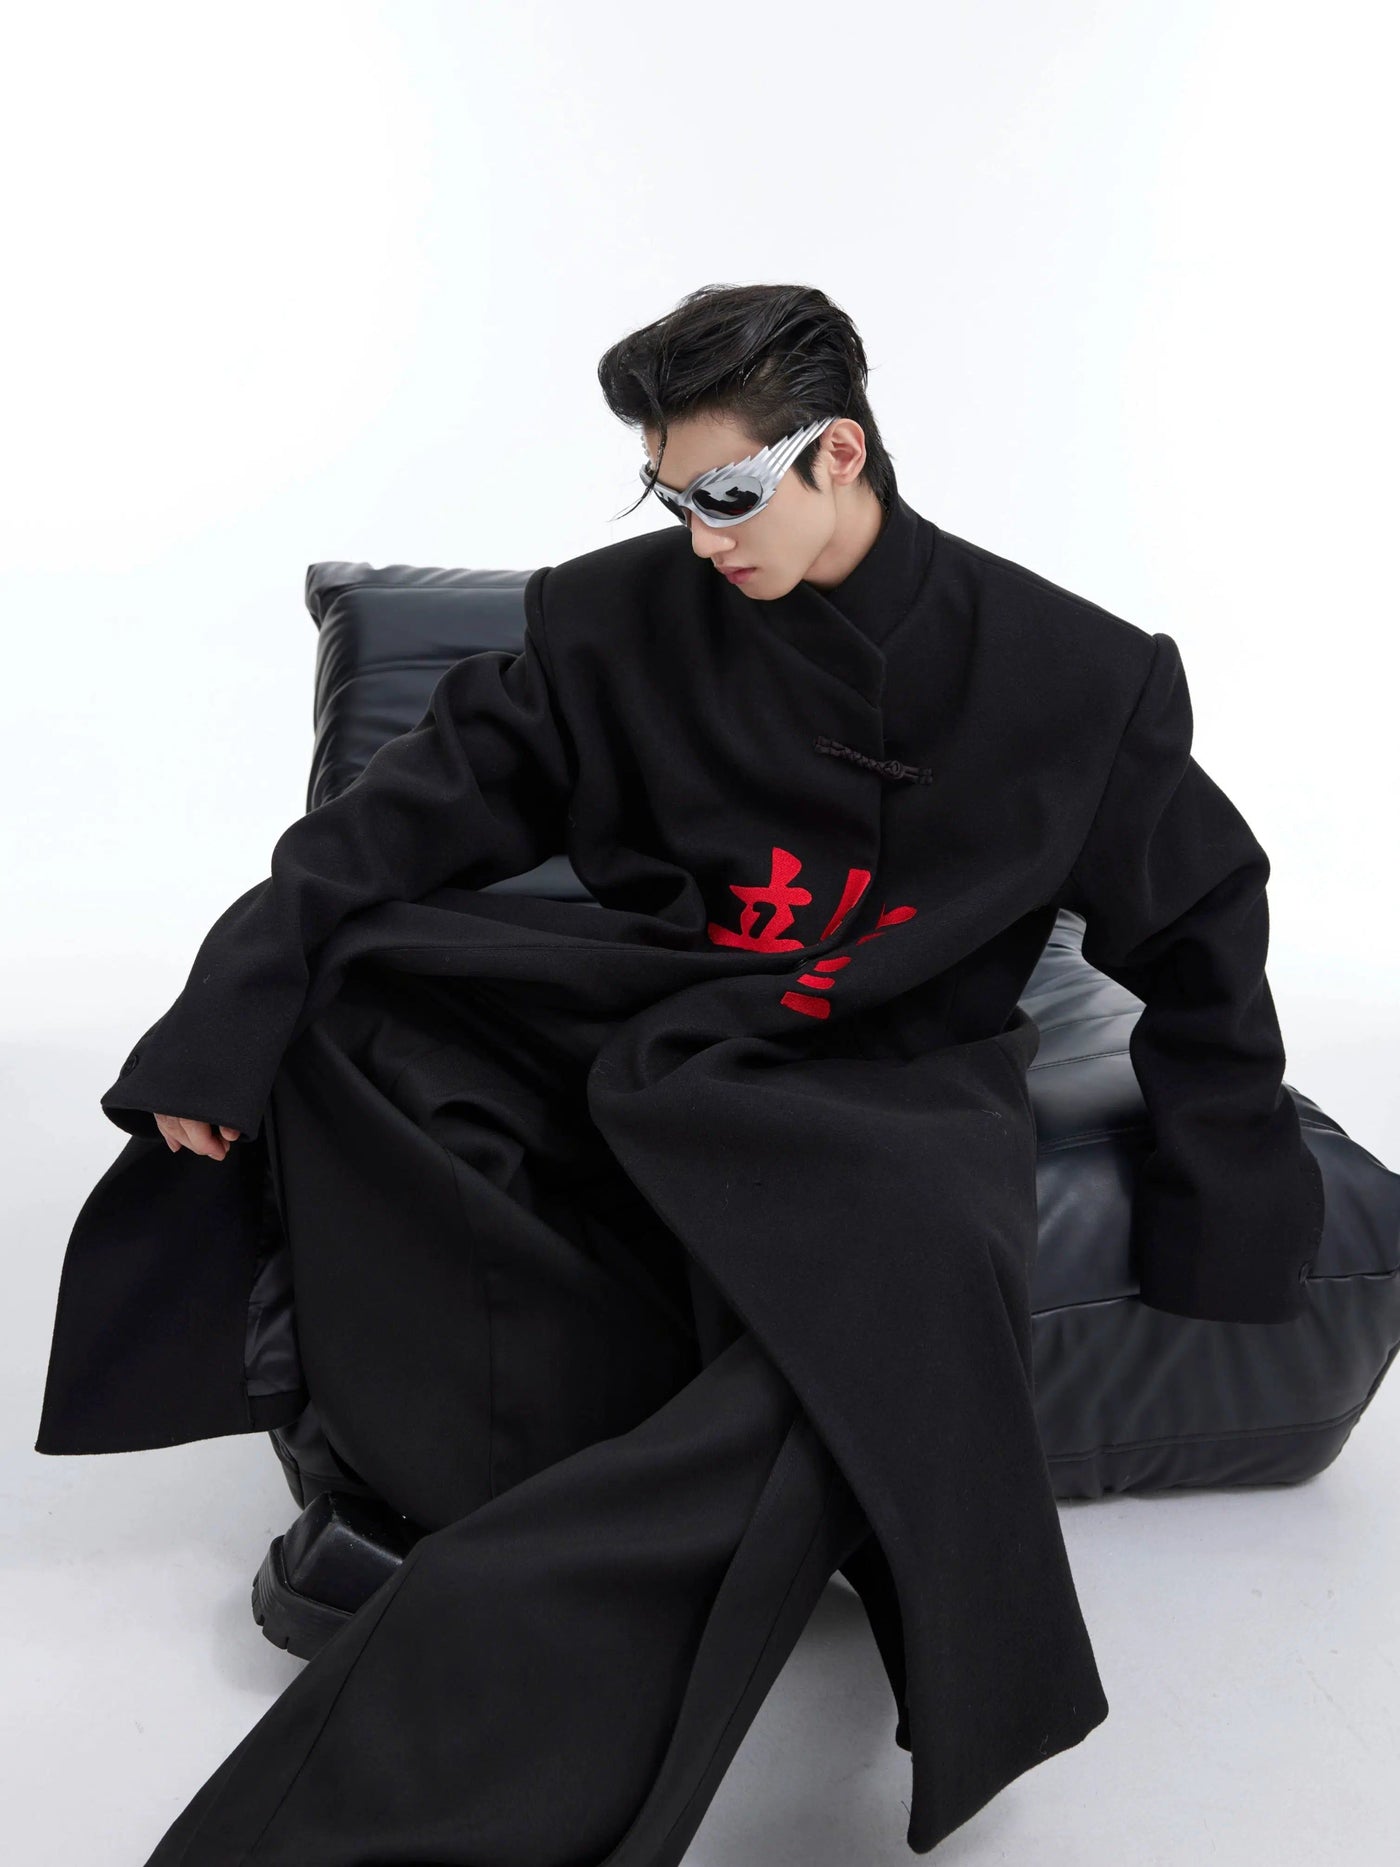 Chinese Character Long Coat Korean Street Fashion Long Coat By Argue Culture Shop Online at OH Vault